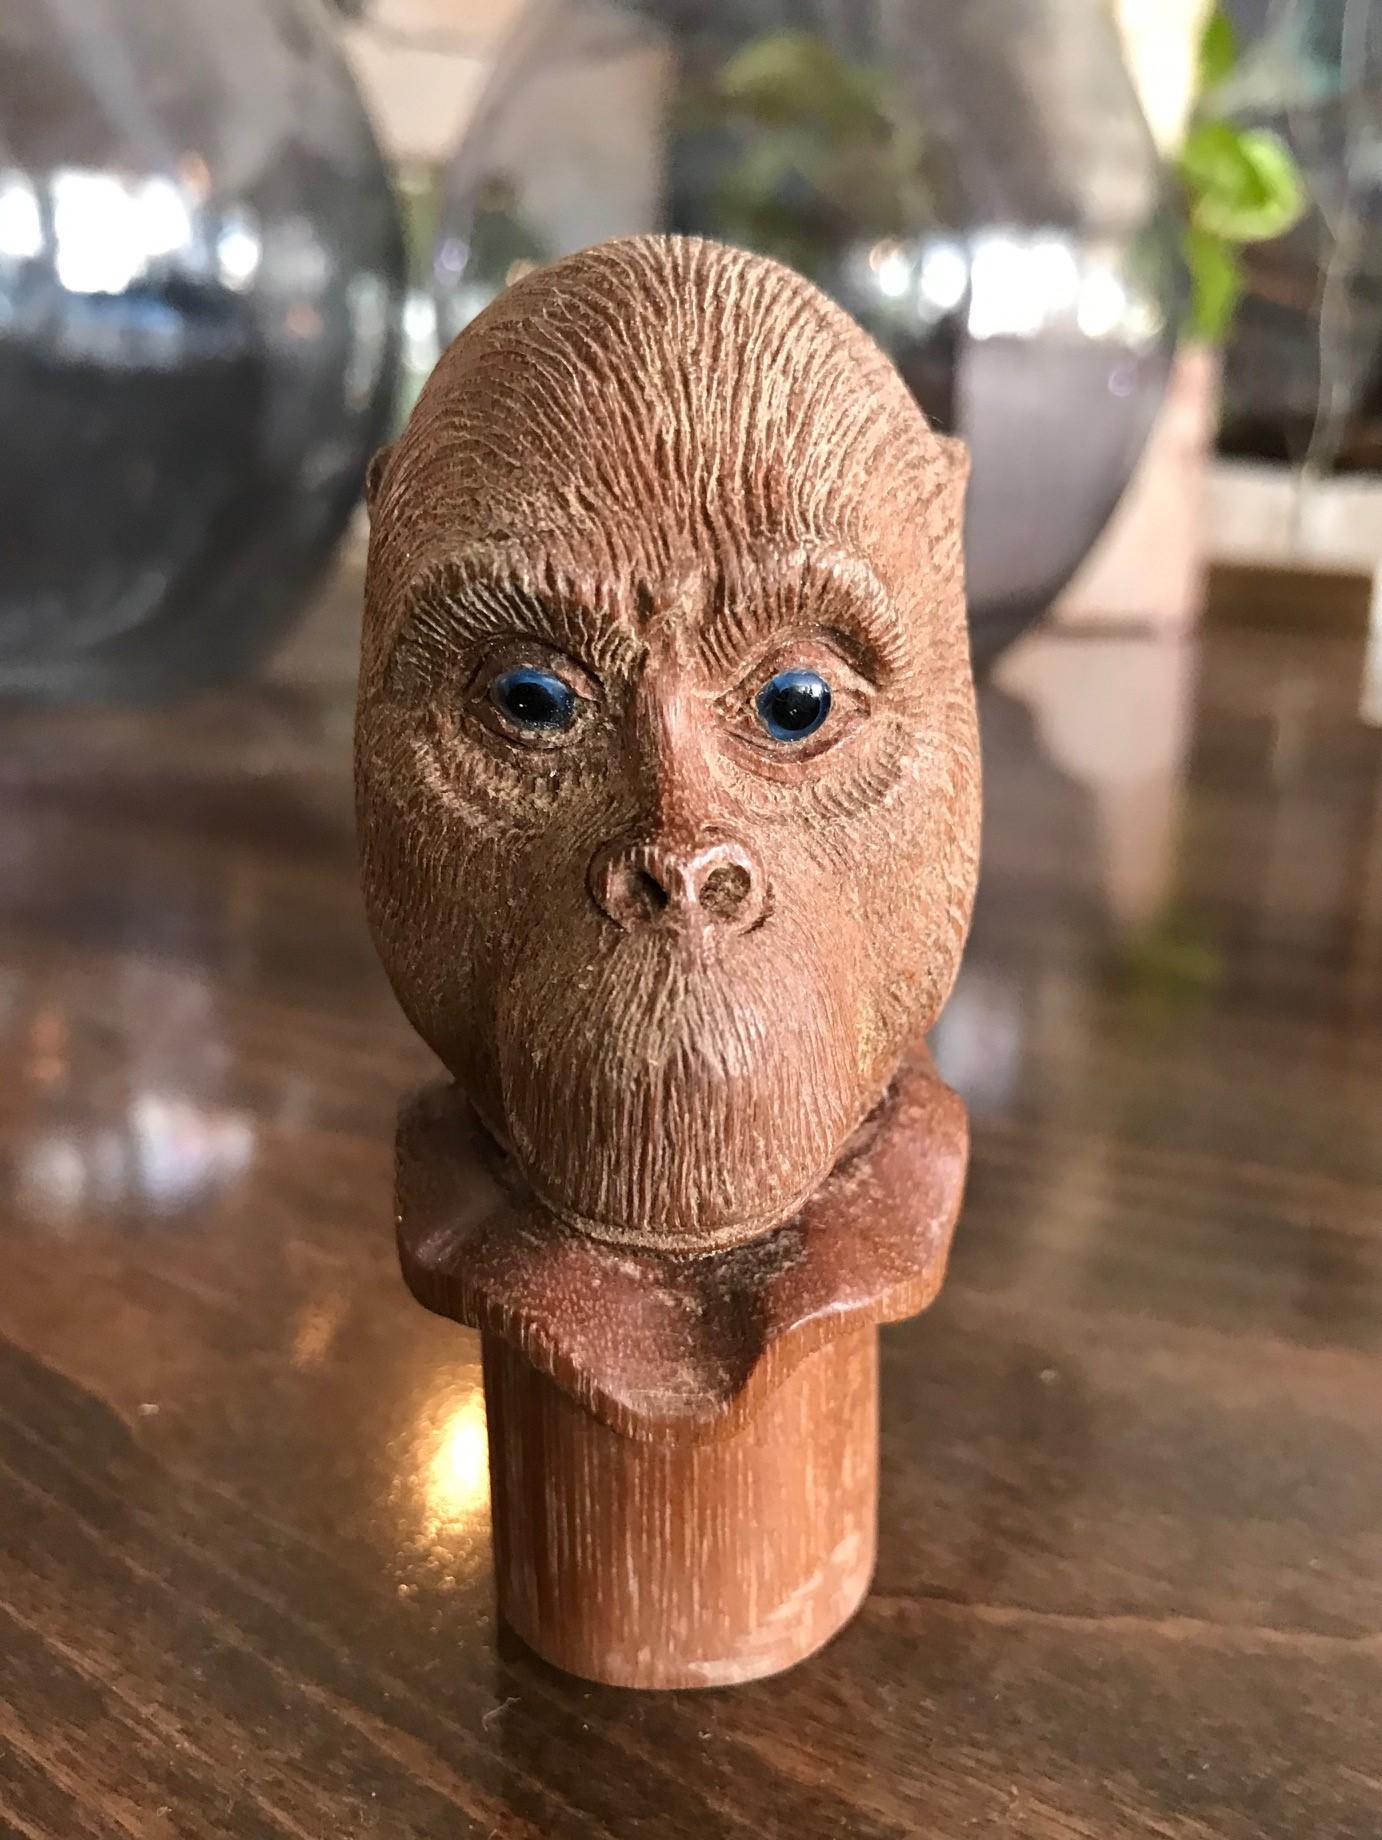 A fantastic and wonderfully hand carved piece. This mischievous looking monkey has beautiful blue glass inset eyes. Would be the crown jewel of any walking cane collection once attached to the cane. Truly a unique and one of a kind work.